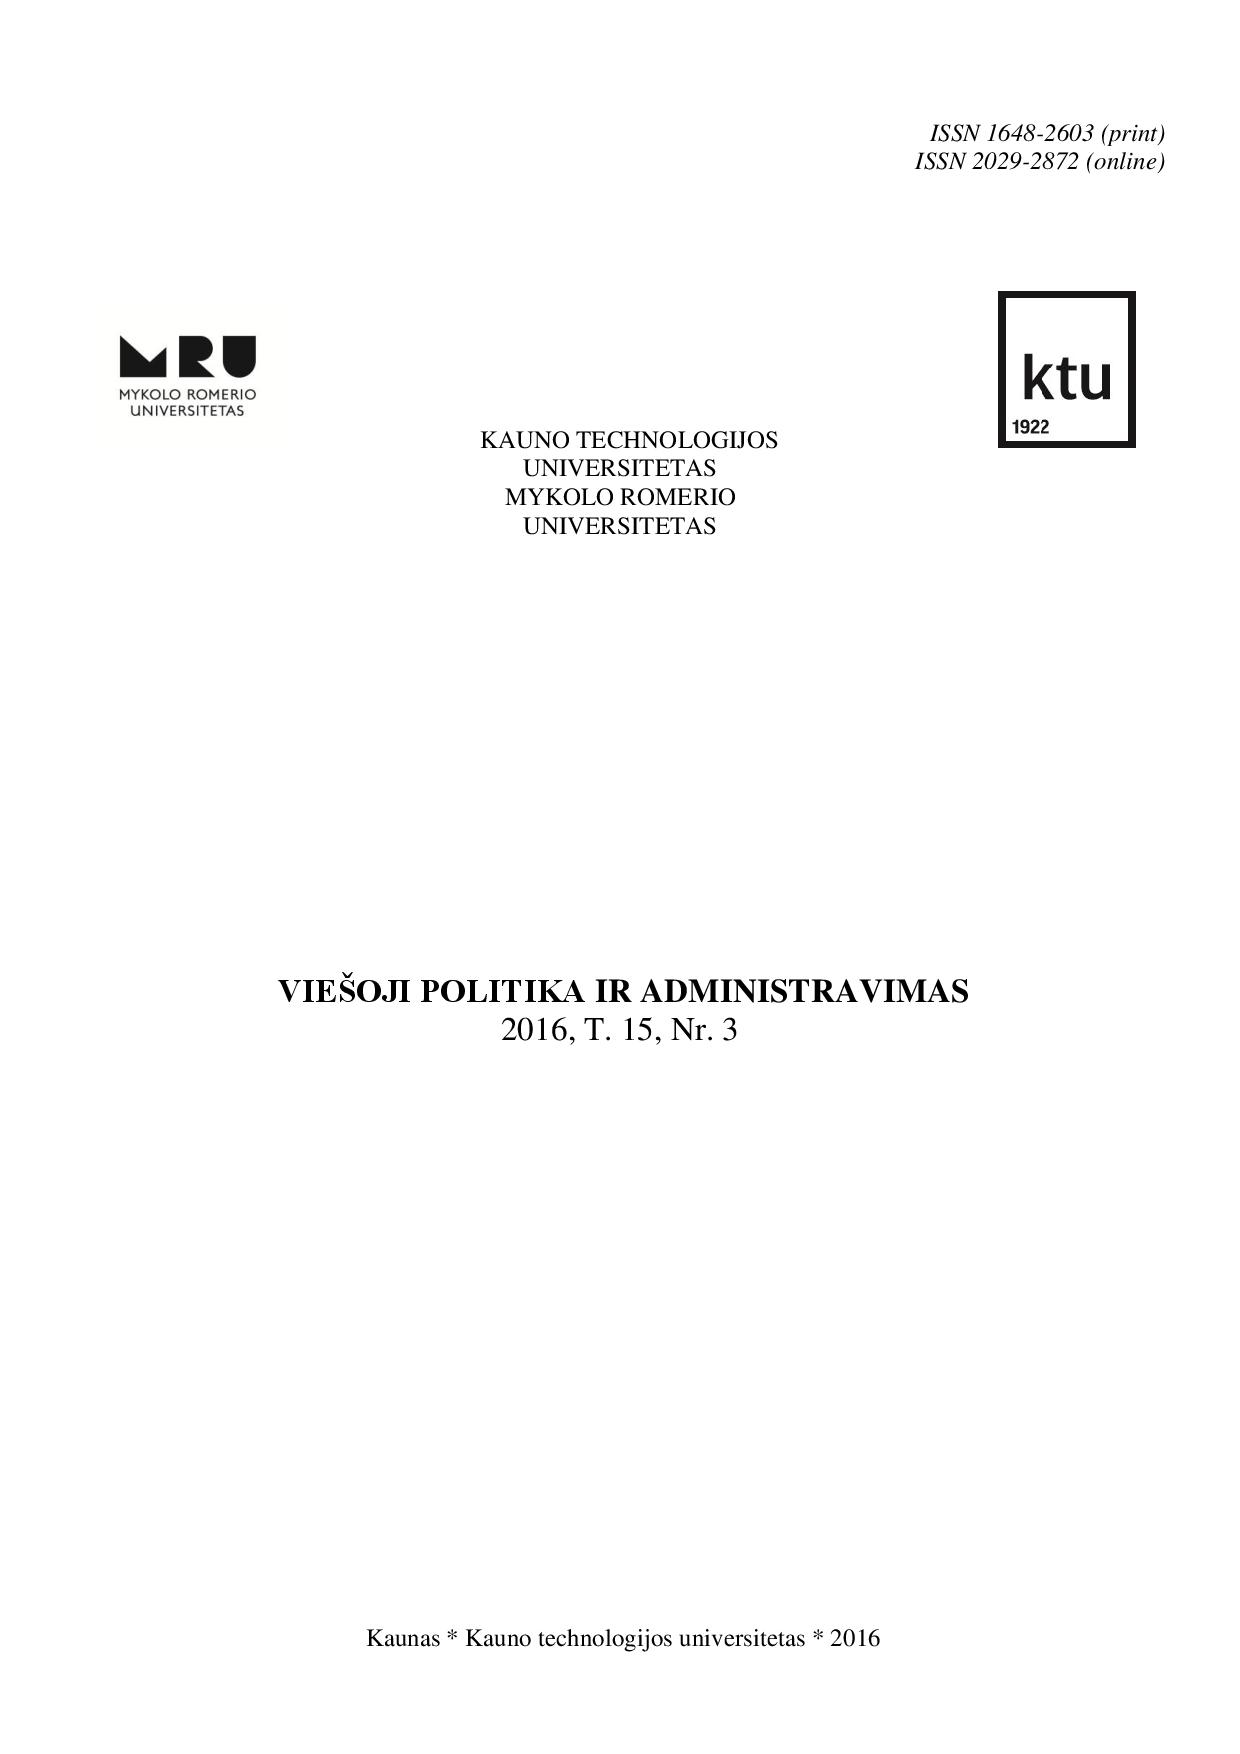 The Implementation of Rights and Guarantees of Pregnant Women in Labour Legal Relationship: the Experience of Lithuania‘s Governmental Institutions Cover Image